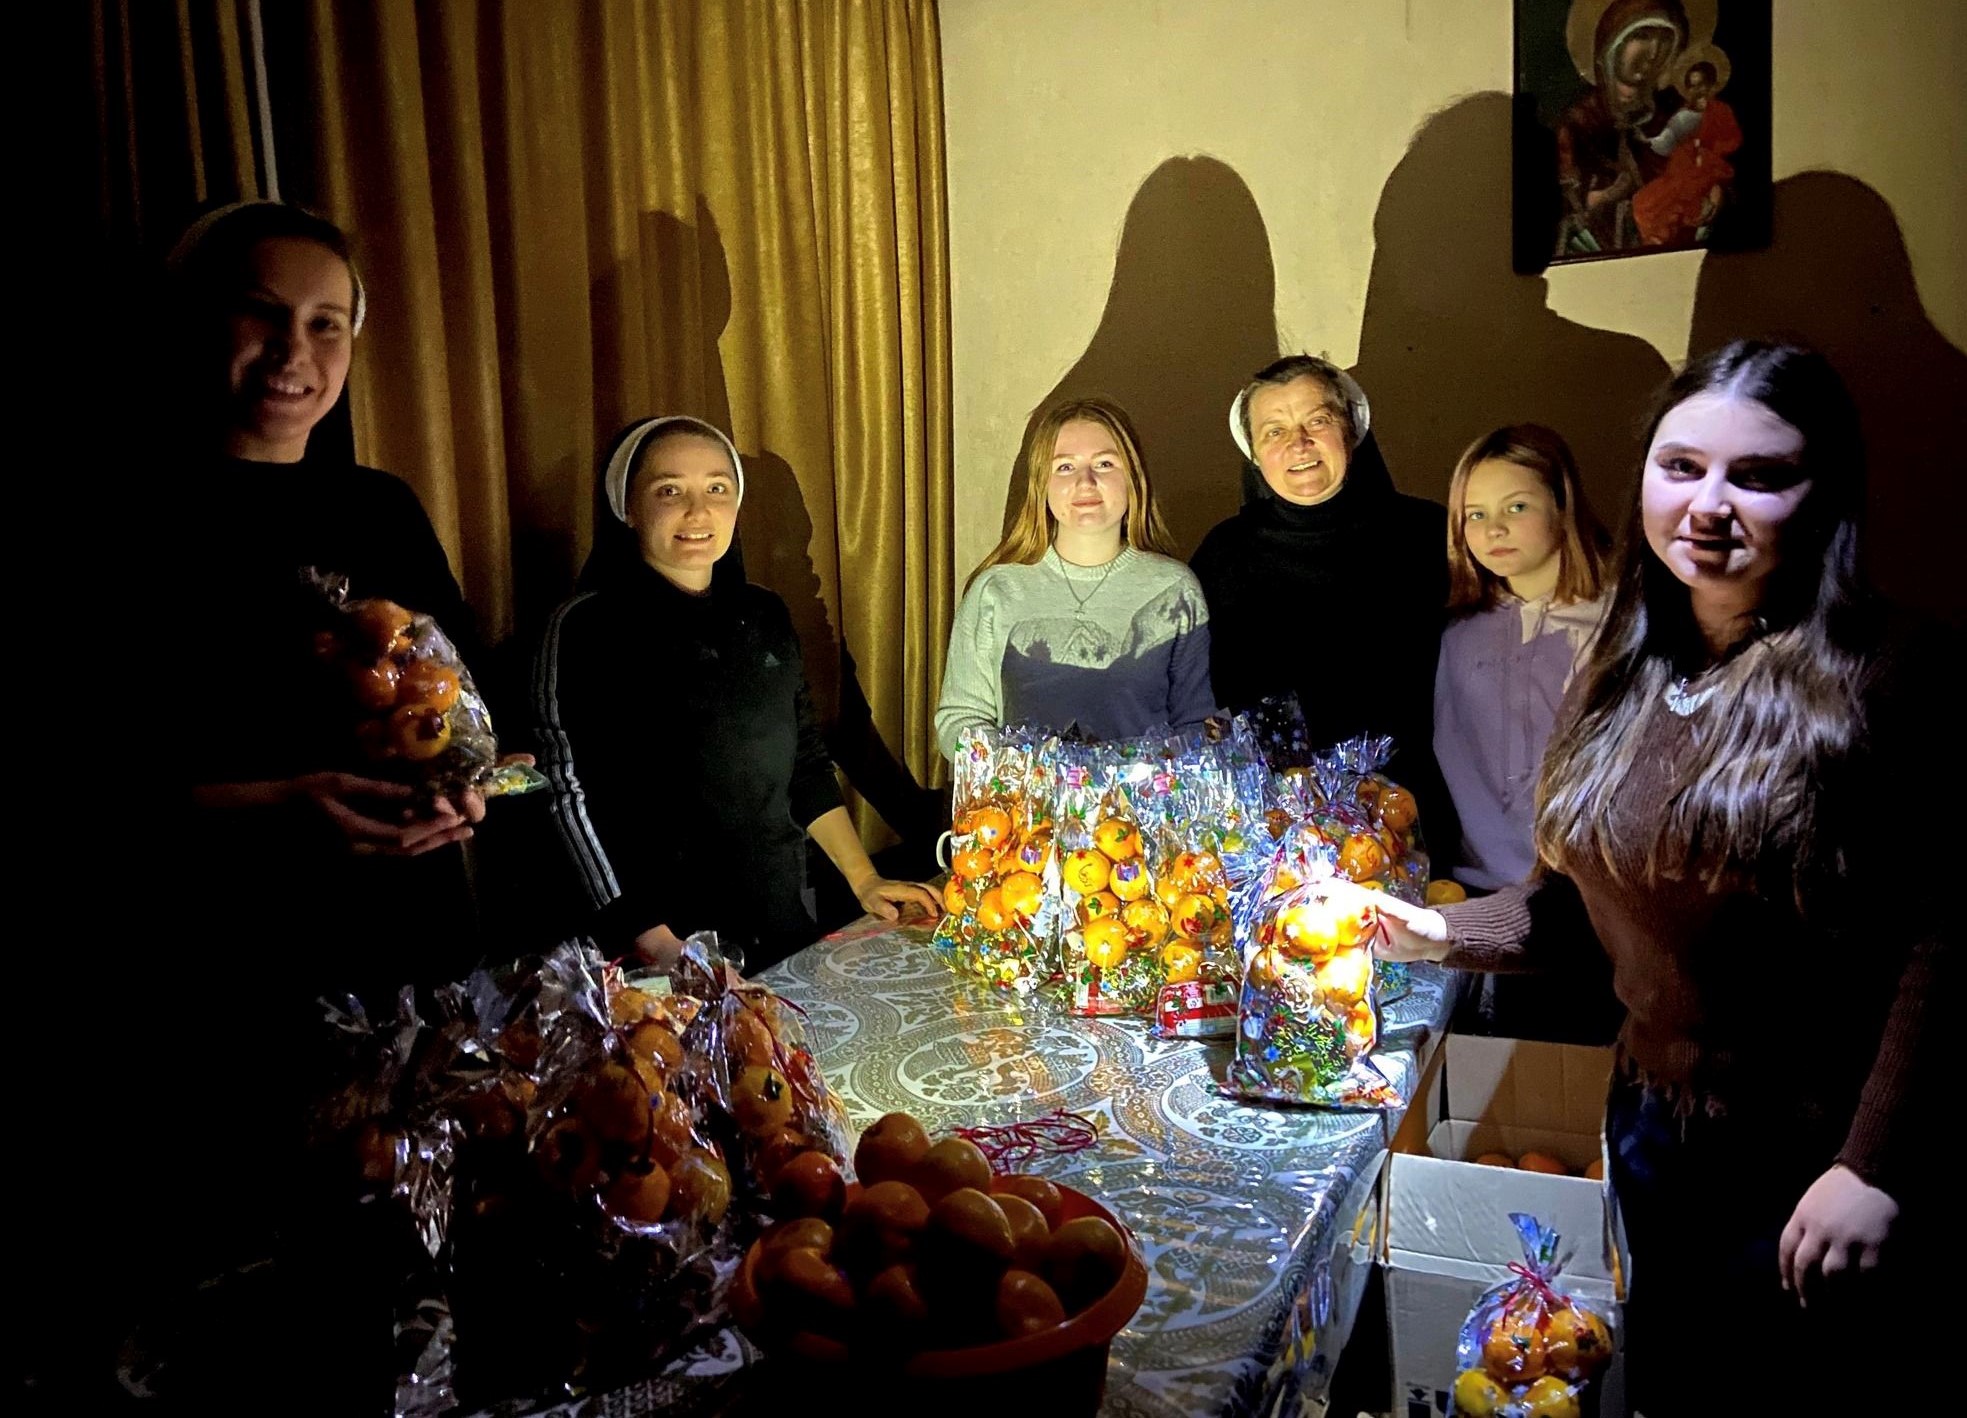 Basilian Sisters and young people prepare for St. Nicholas Day during a blackout in eastern Ukraine on Dec. 19, 2022, the feast of St. Nicholas. They are around a table with holiday food and they cast shadows on the walls.  calendar, which Ukraine follows. (